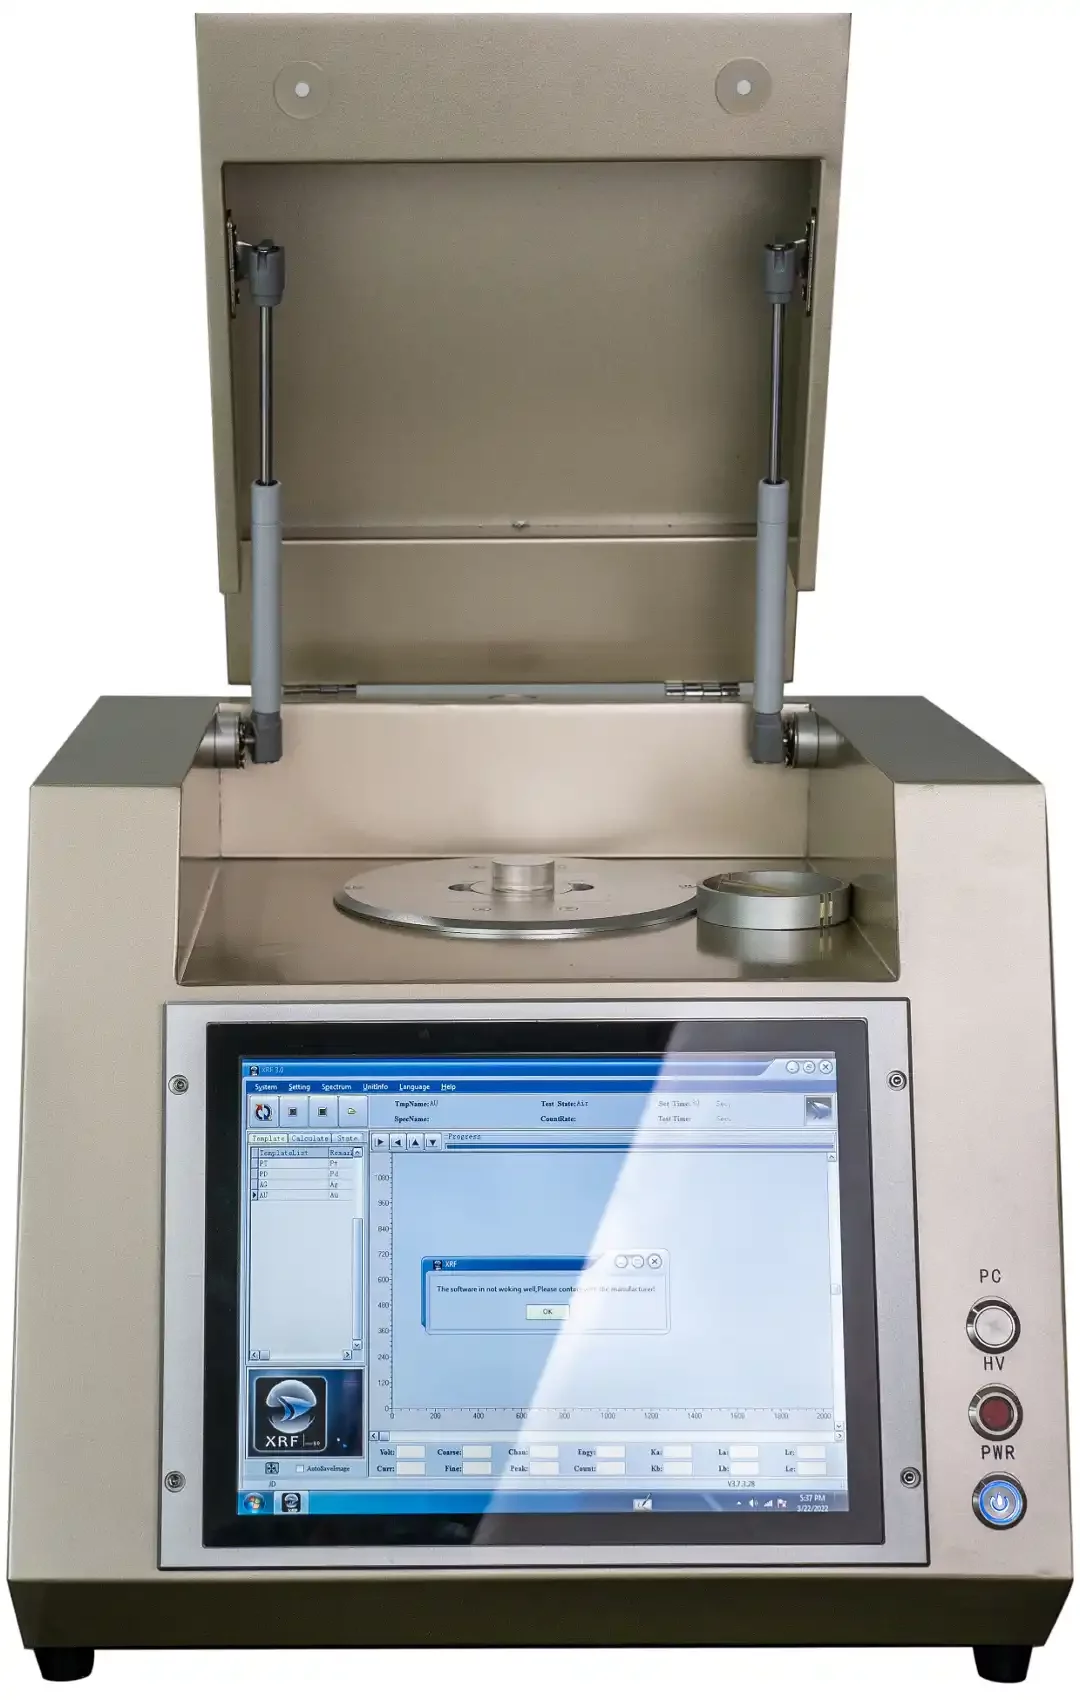 Gold tester, gold testing machine and precious metal tester